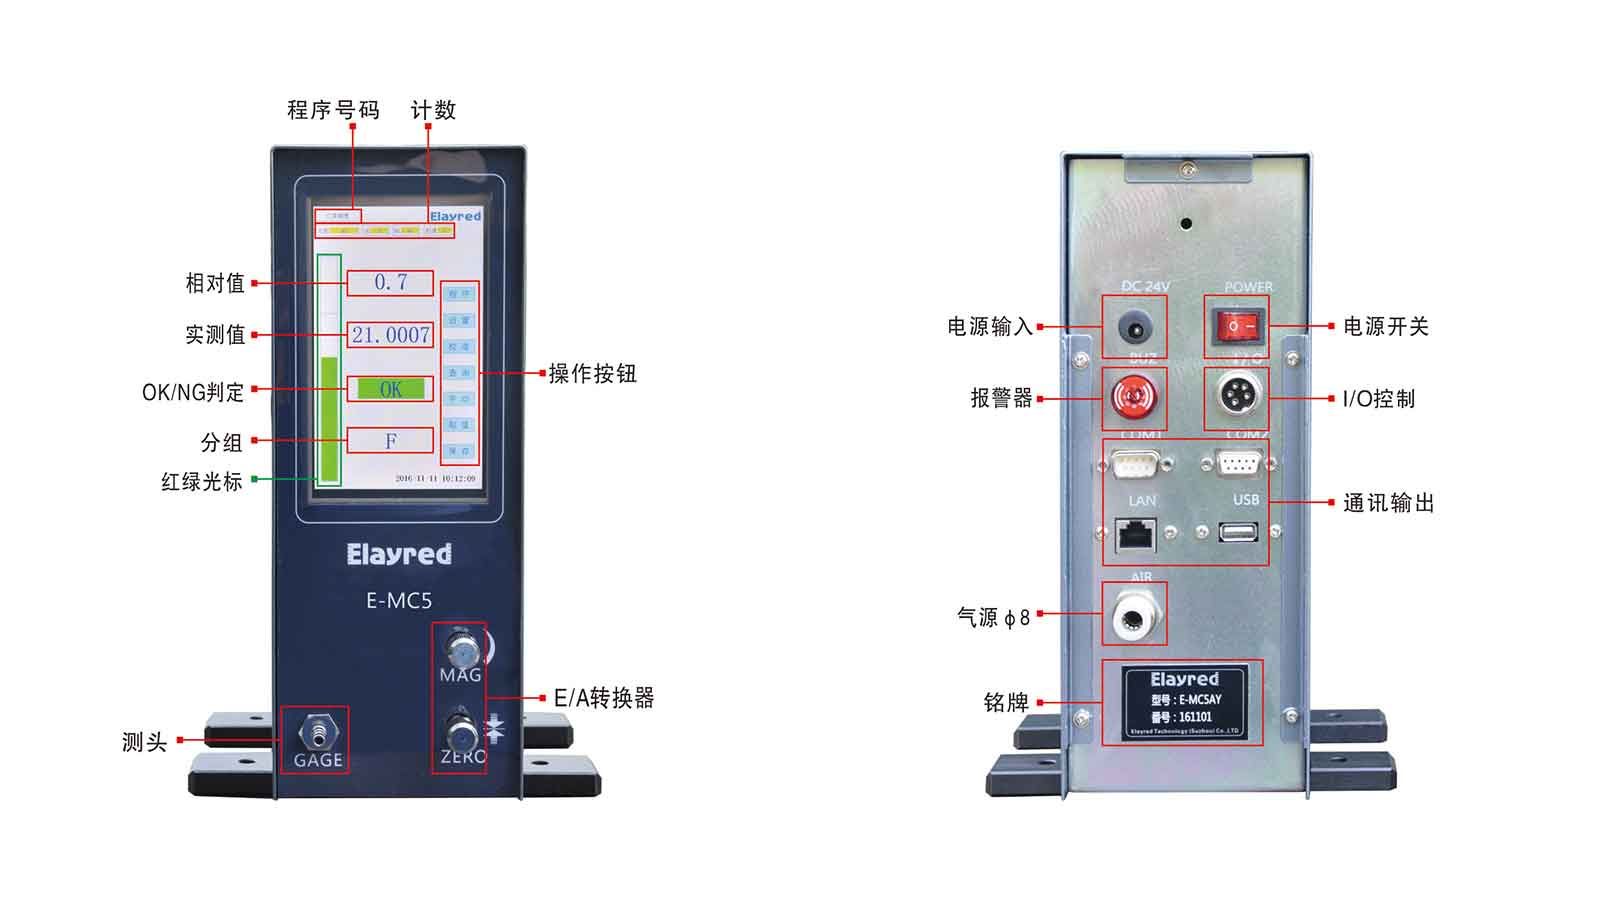 What are the form and position tolerances that can be measured by a digital display gas meter?